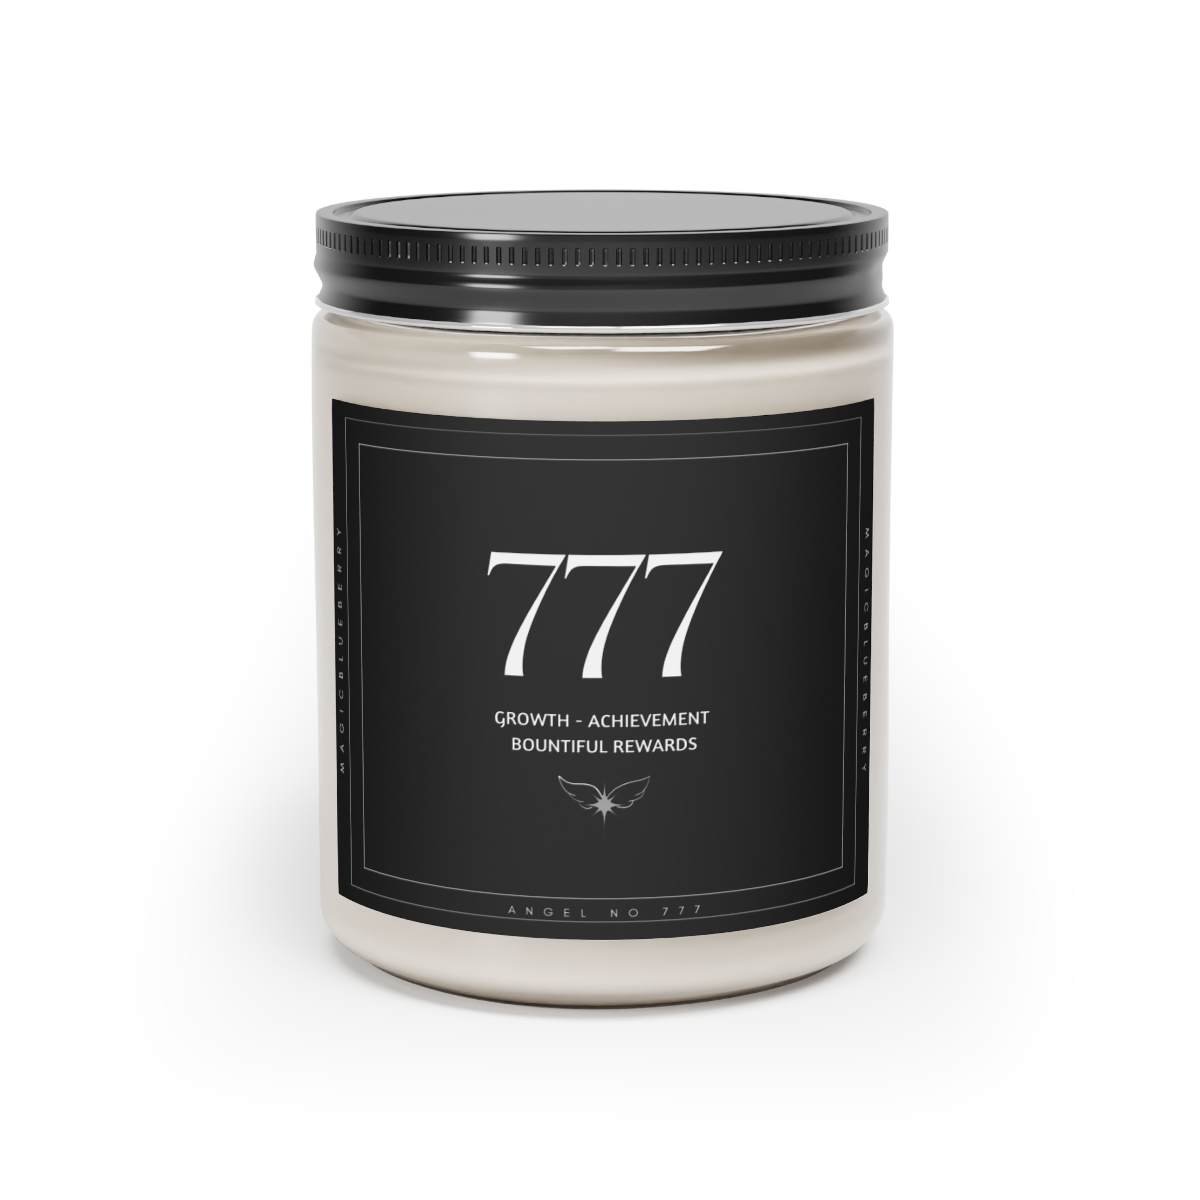 Angel Spell 777 - Scented Vegan Soy Wax Candles, Clear Jar Candle, Spell Candles, Sassy Candle, Vegan Candle, Cotton Wick Candle product thumbnail image